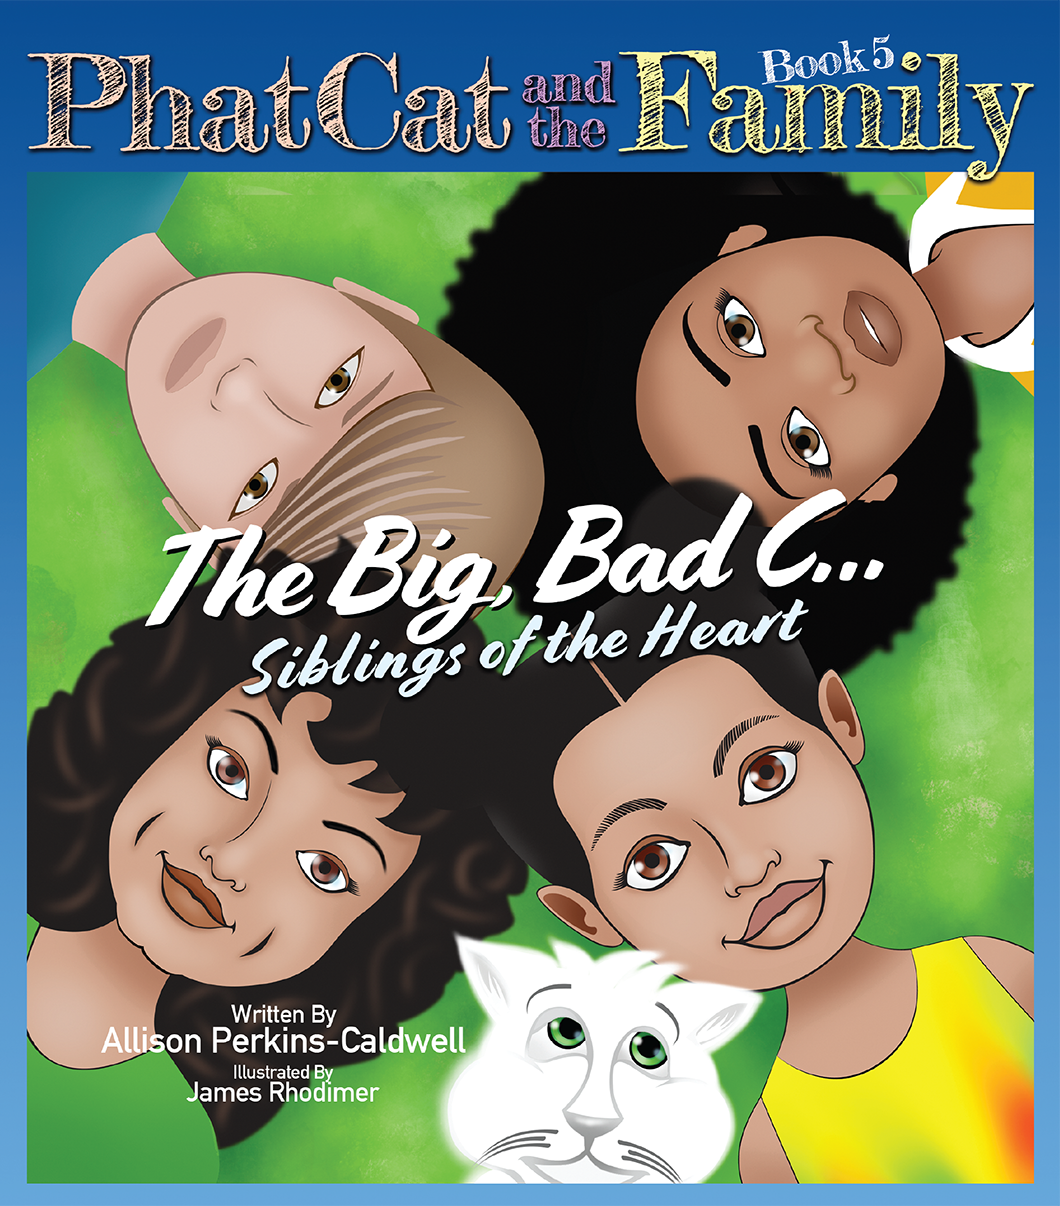 Soft Cover Book 5 Phat Cat and the Family The Big, Bad C...Siblings of the Heart